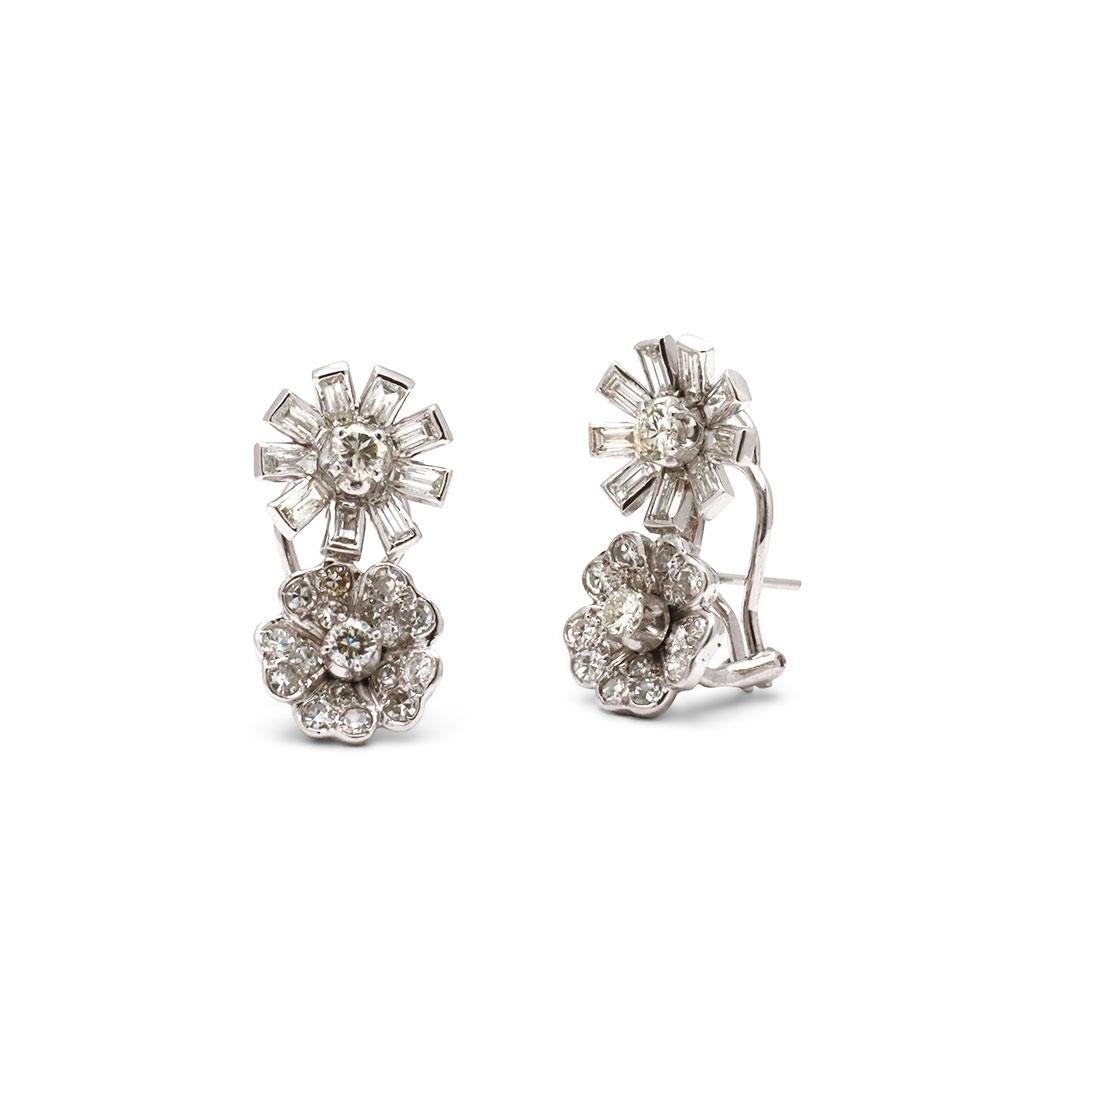 A stunning pair of stud earrings crafted in platinum. The unique floral design features one flower comprised of emerald cut diamonds with a round diamond center sitting atop another flower with heart-shaped petals pave set with round brilliant cut